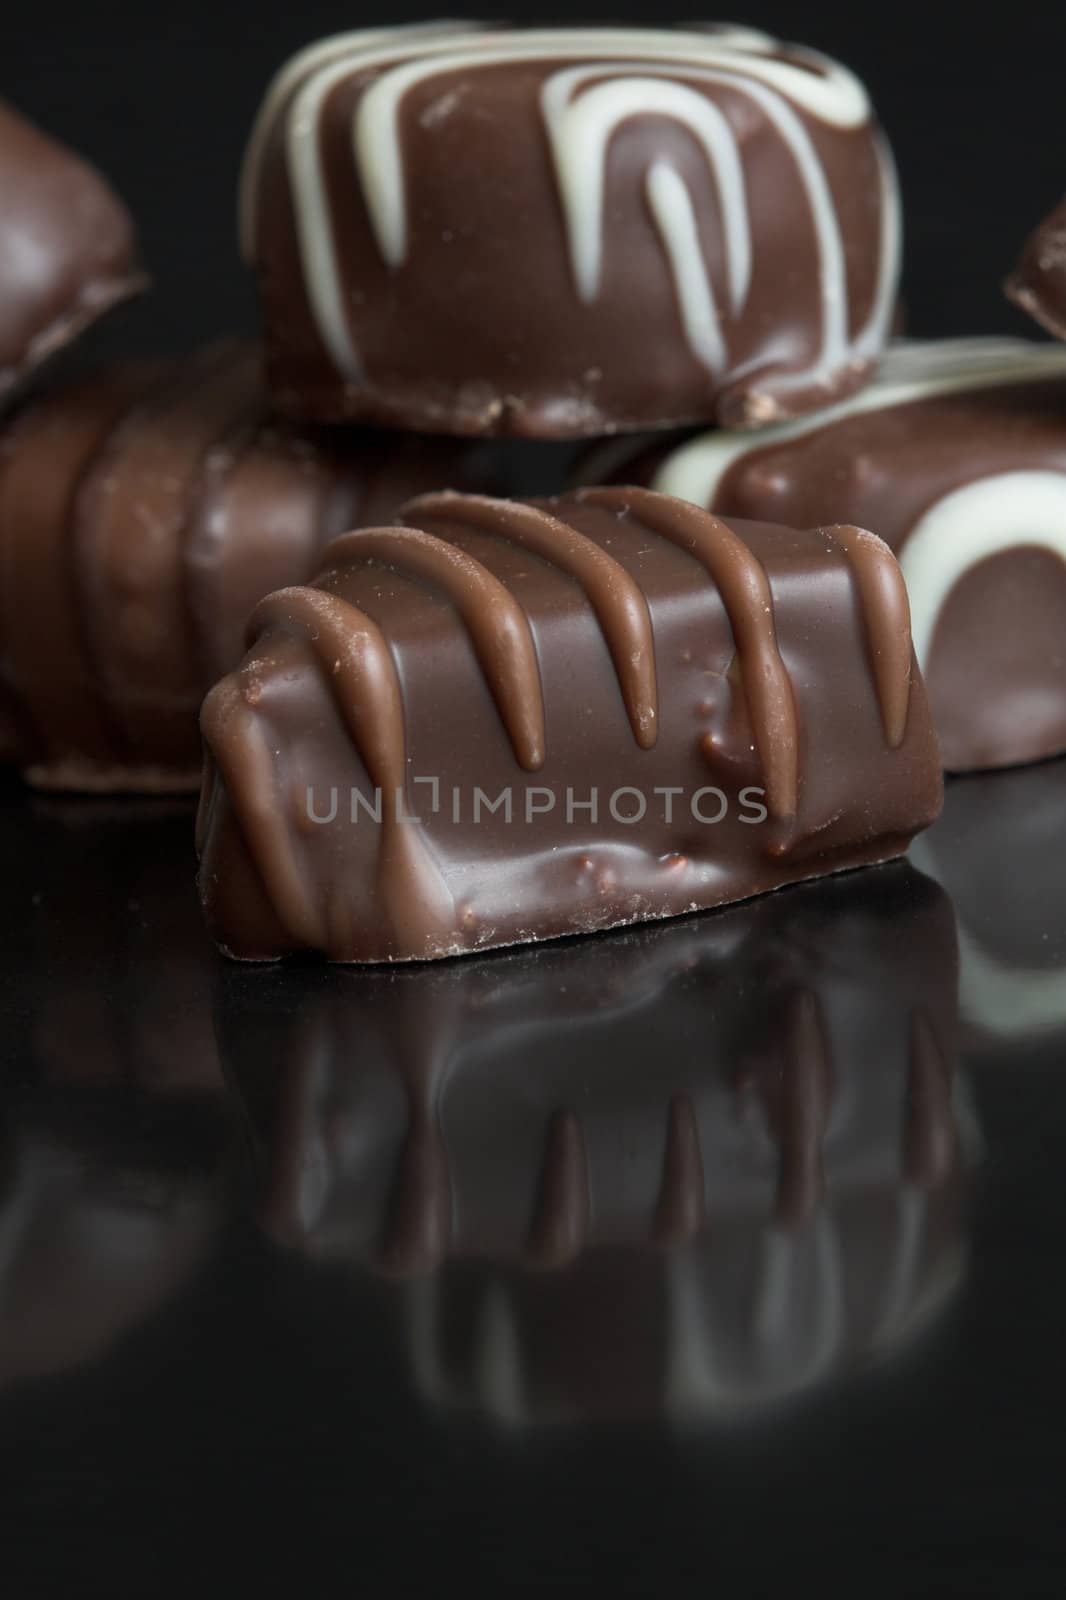 Delicious chocolates on black background with reflection